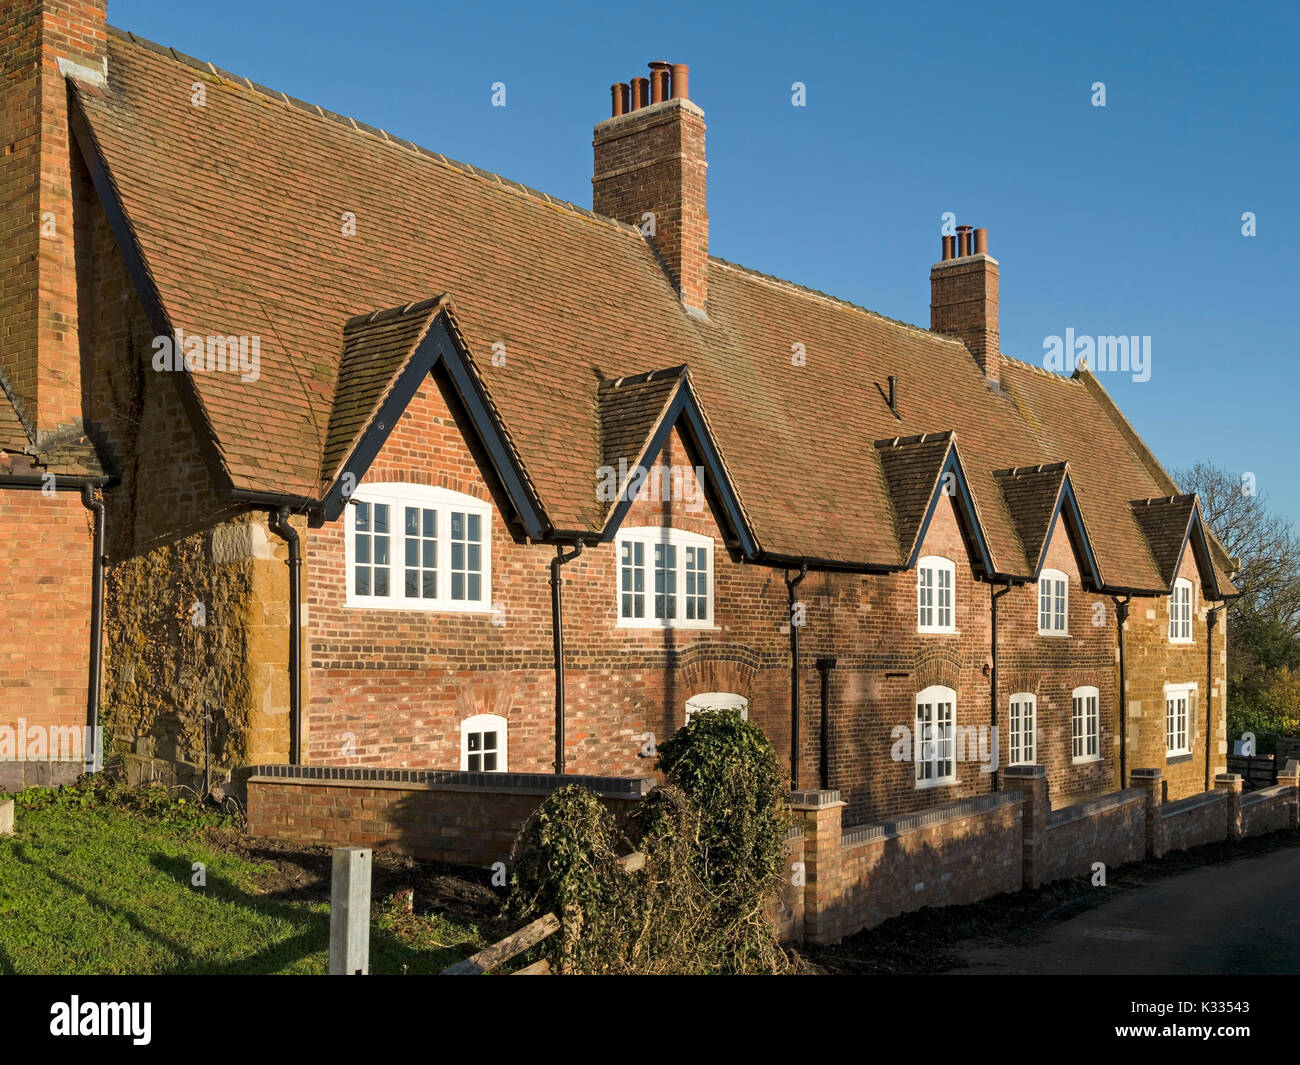 Row of old red brick cottages, Peppers Farm, Burton Lazars, Leicestershire, England, UK Stock Photo